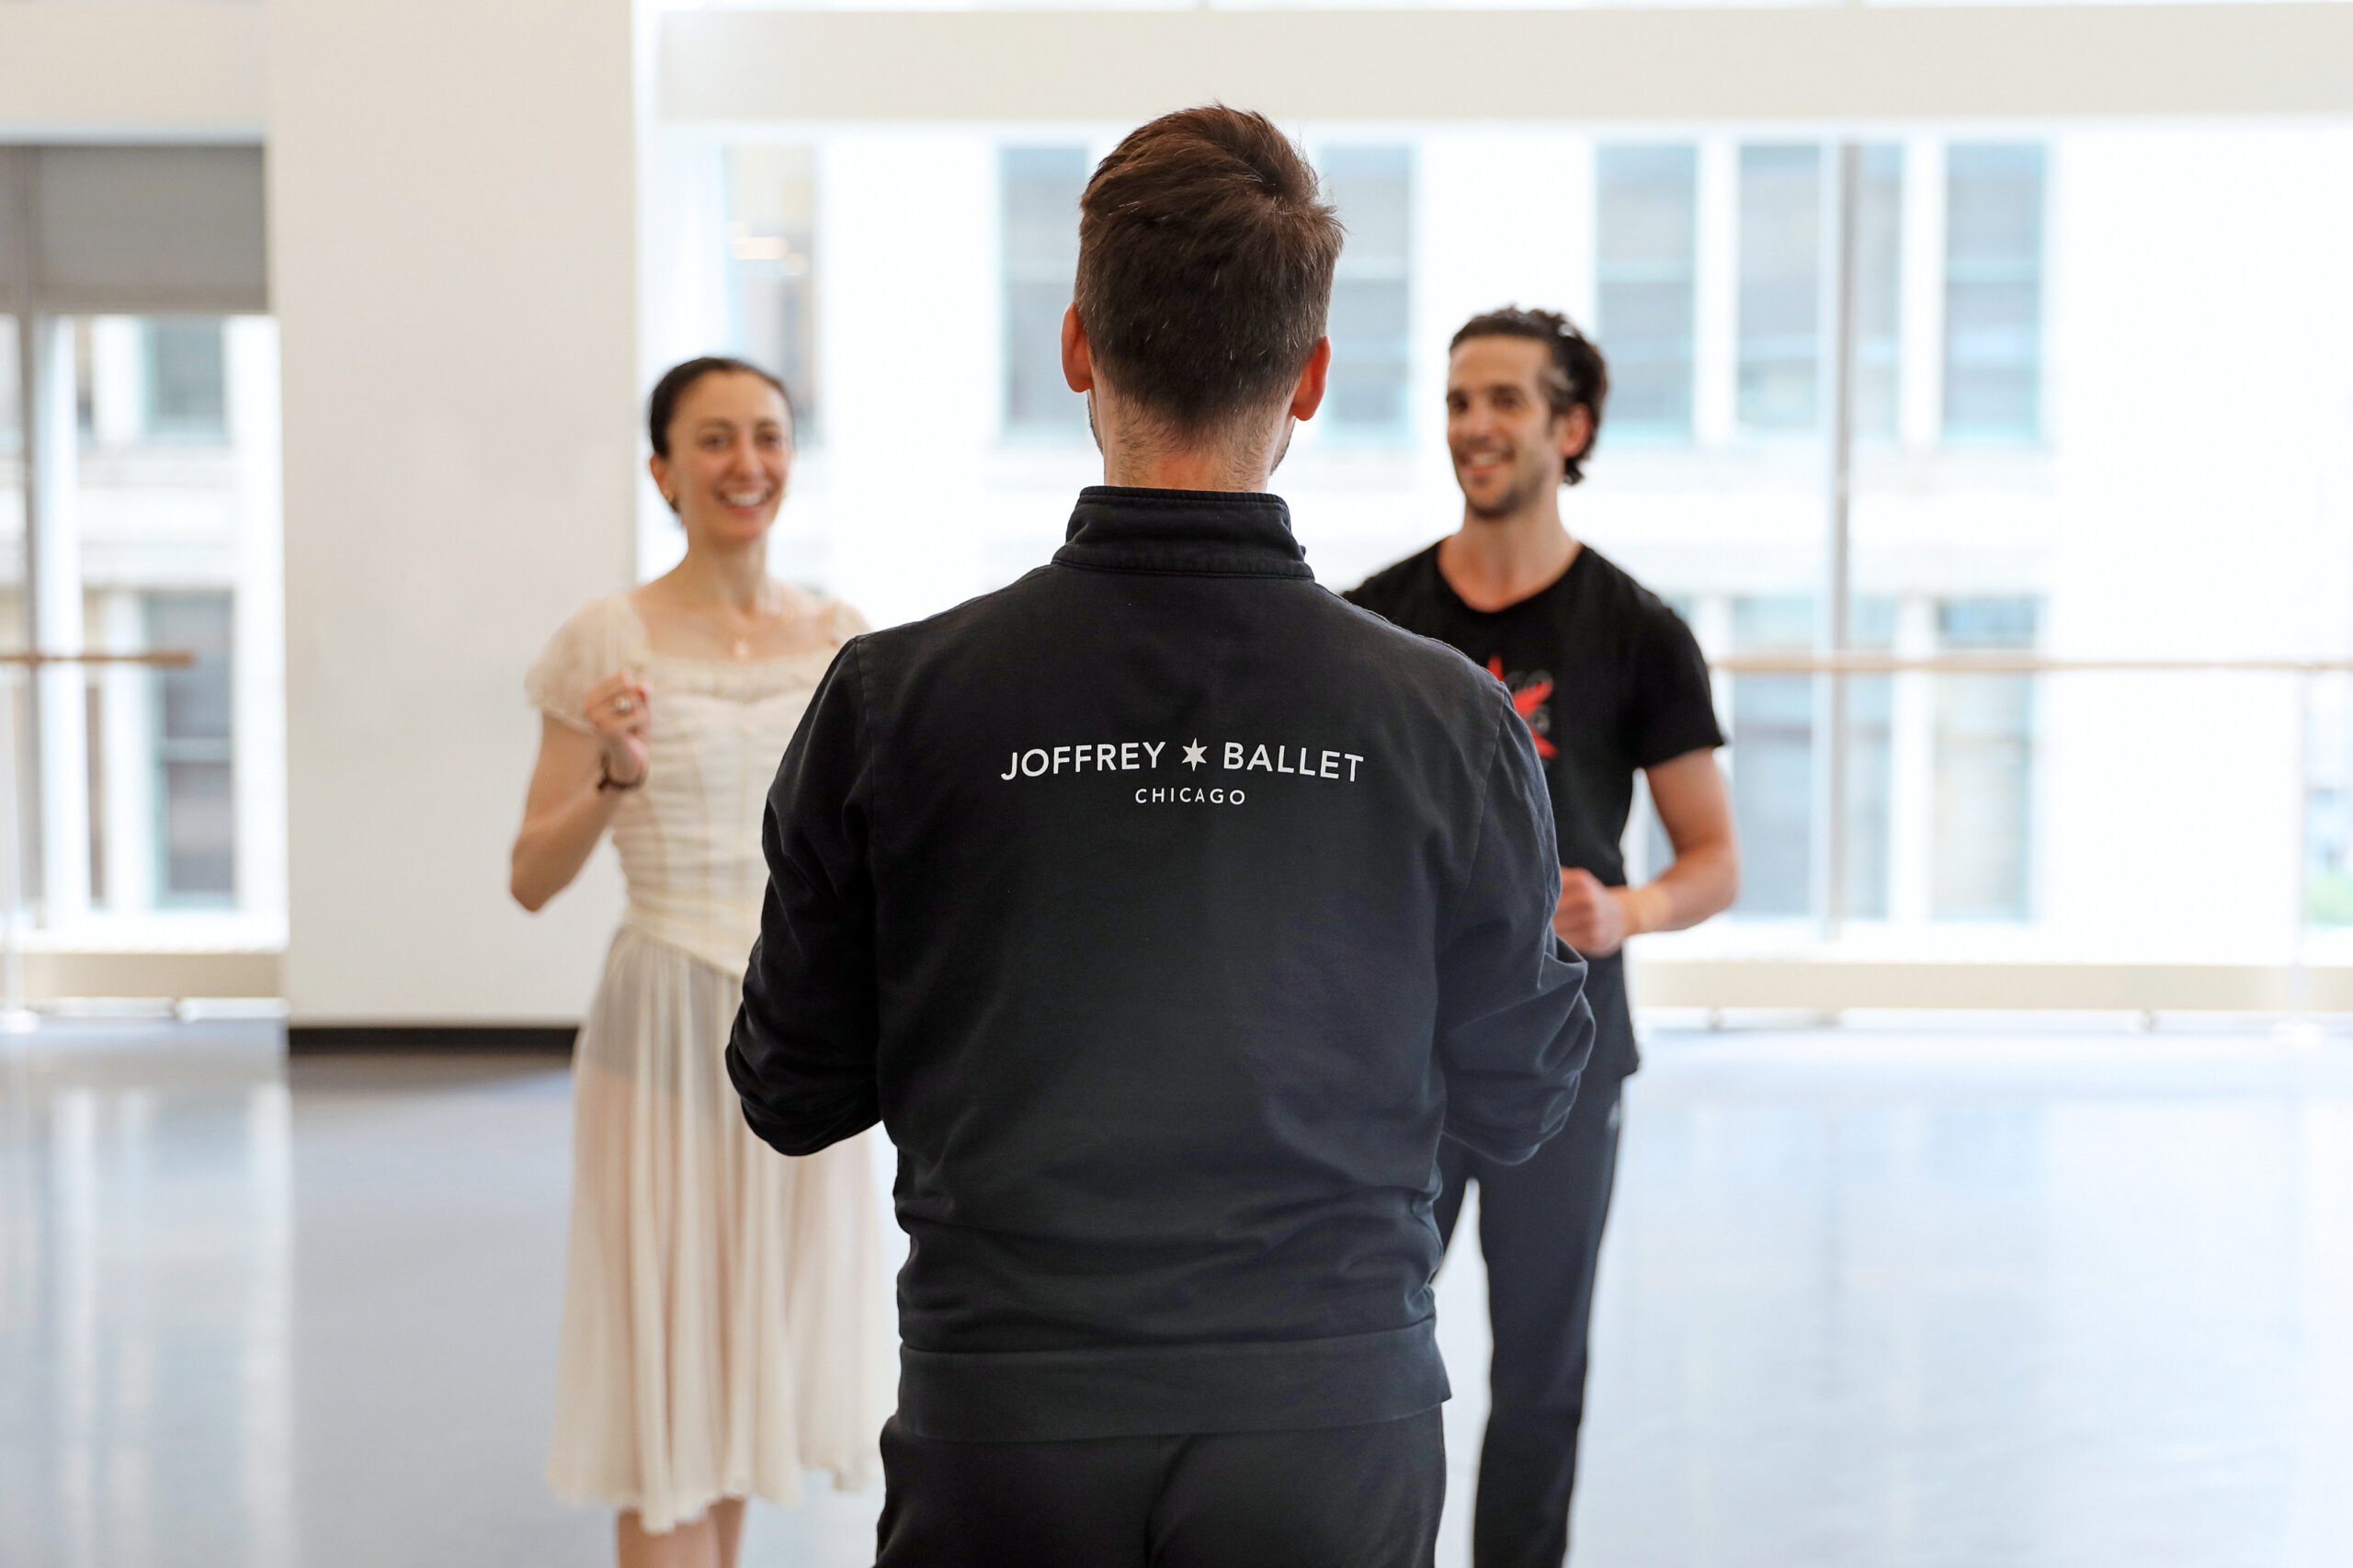 Adam Blyde is shown from behind in a large, airy dance studio, standing in front of dancers Victoria Jaiani and Alberto Velazquez, talking to them. He wears a black zip-up sweatshirt with the words "Joffrey Ballet Chicago" on the back. Jaiani wears a costume of a filmy white dress, while Velazquez wears a black T-shirt and black athletic pants; they both laugh as Blyde talks to them.